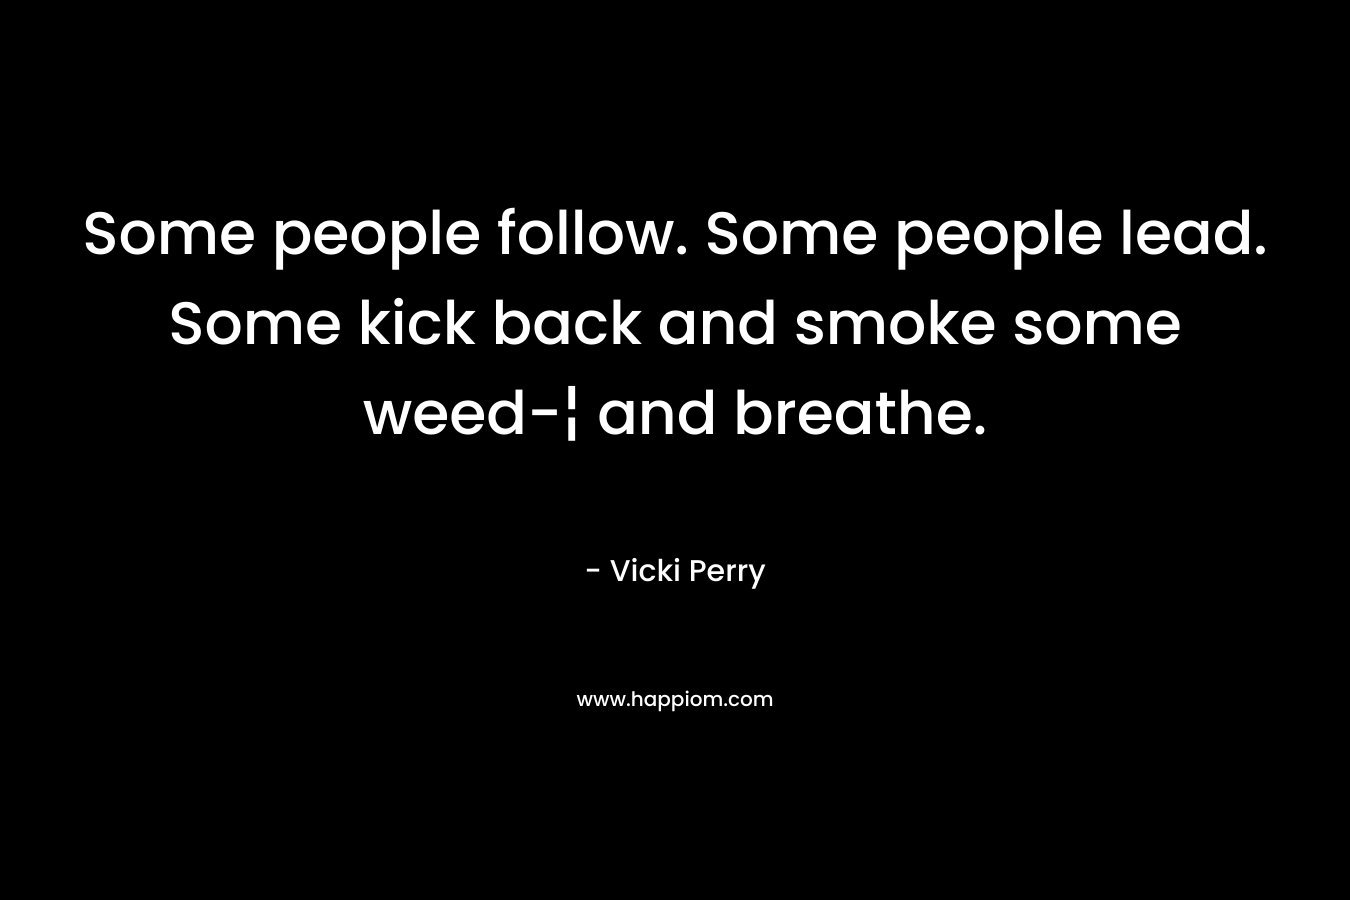 Some people follow. Some people lead. Some kick back and smoke some weed-¦ and breathe. – Vicki Perry